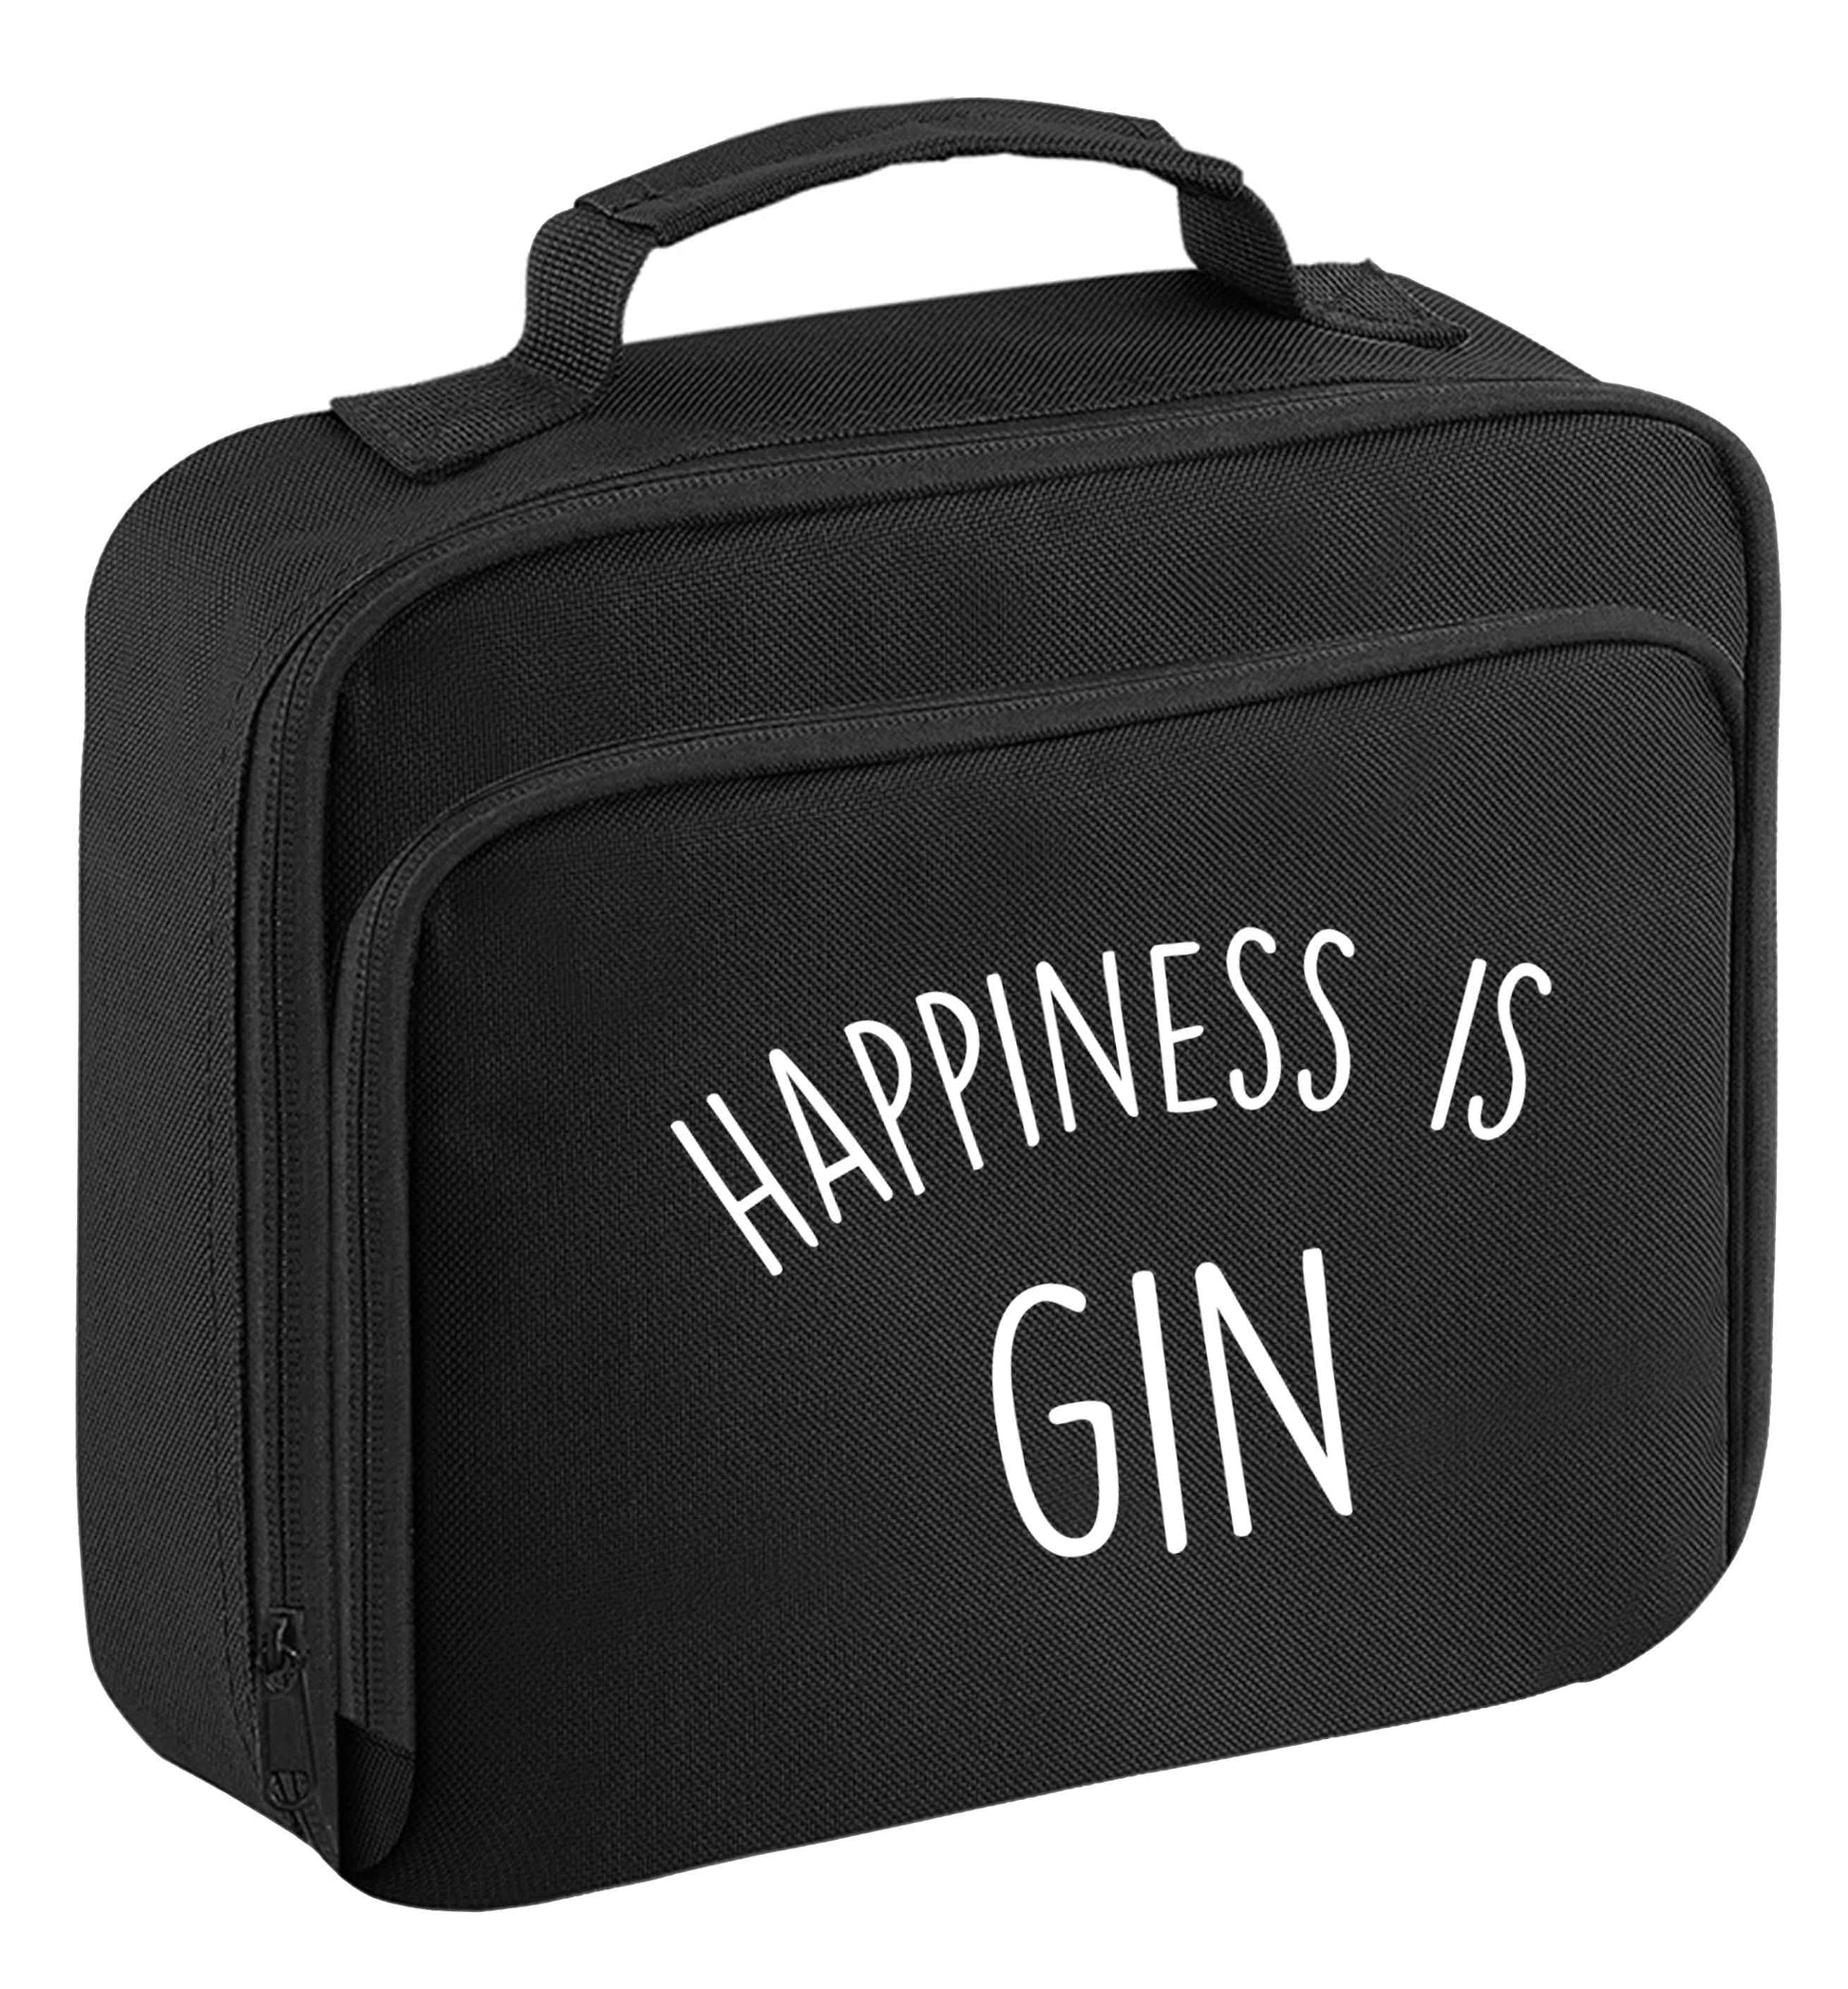 Happiness is gin insulated black lunch bag cooler